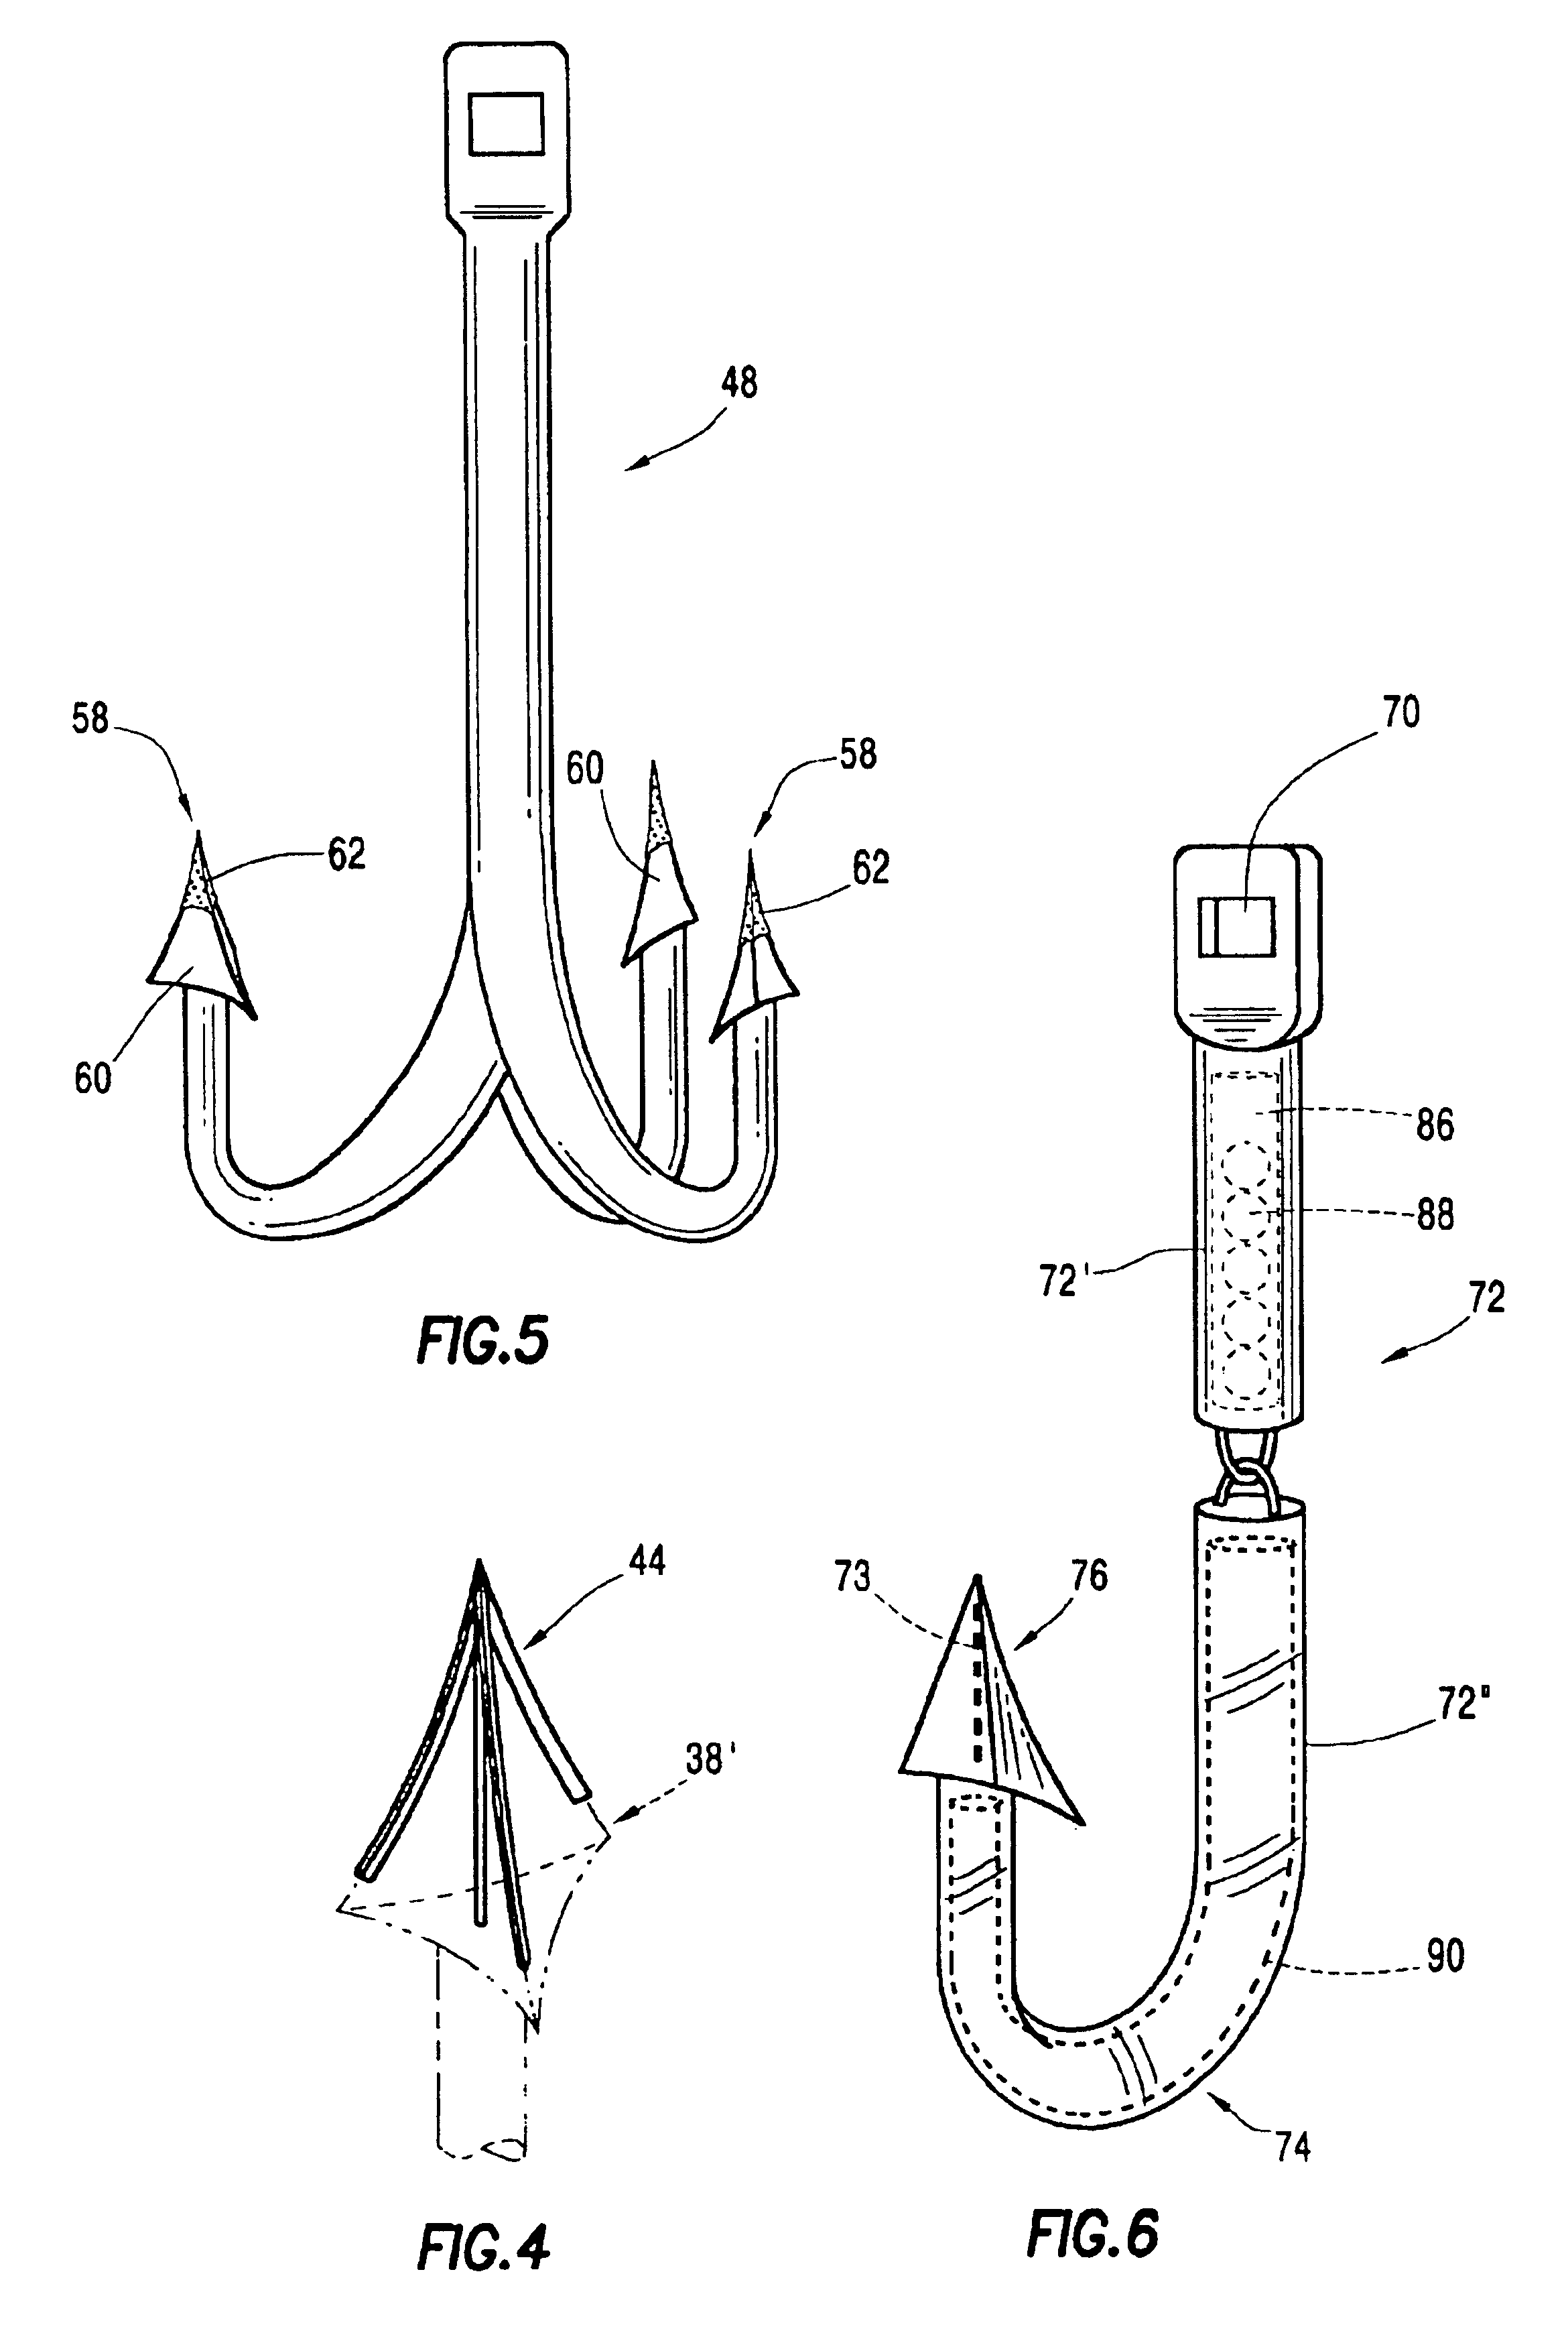 Composite fish hook having improved strength and penetration capability